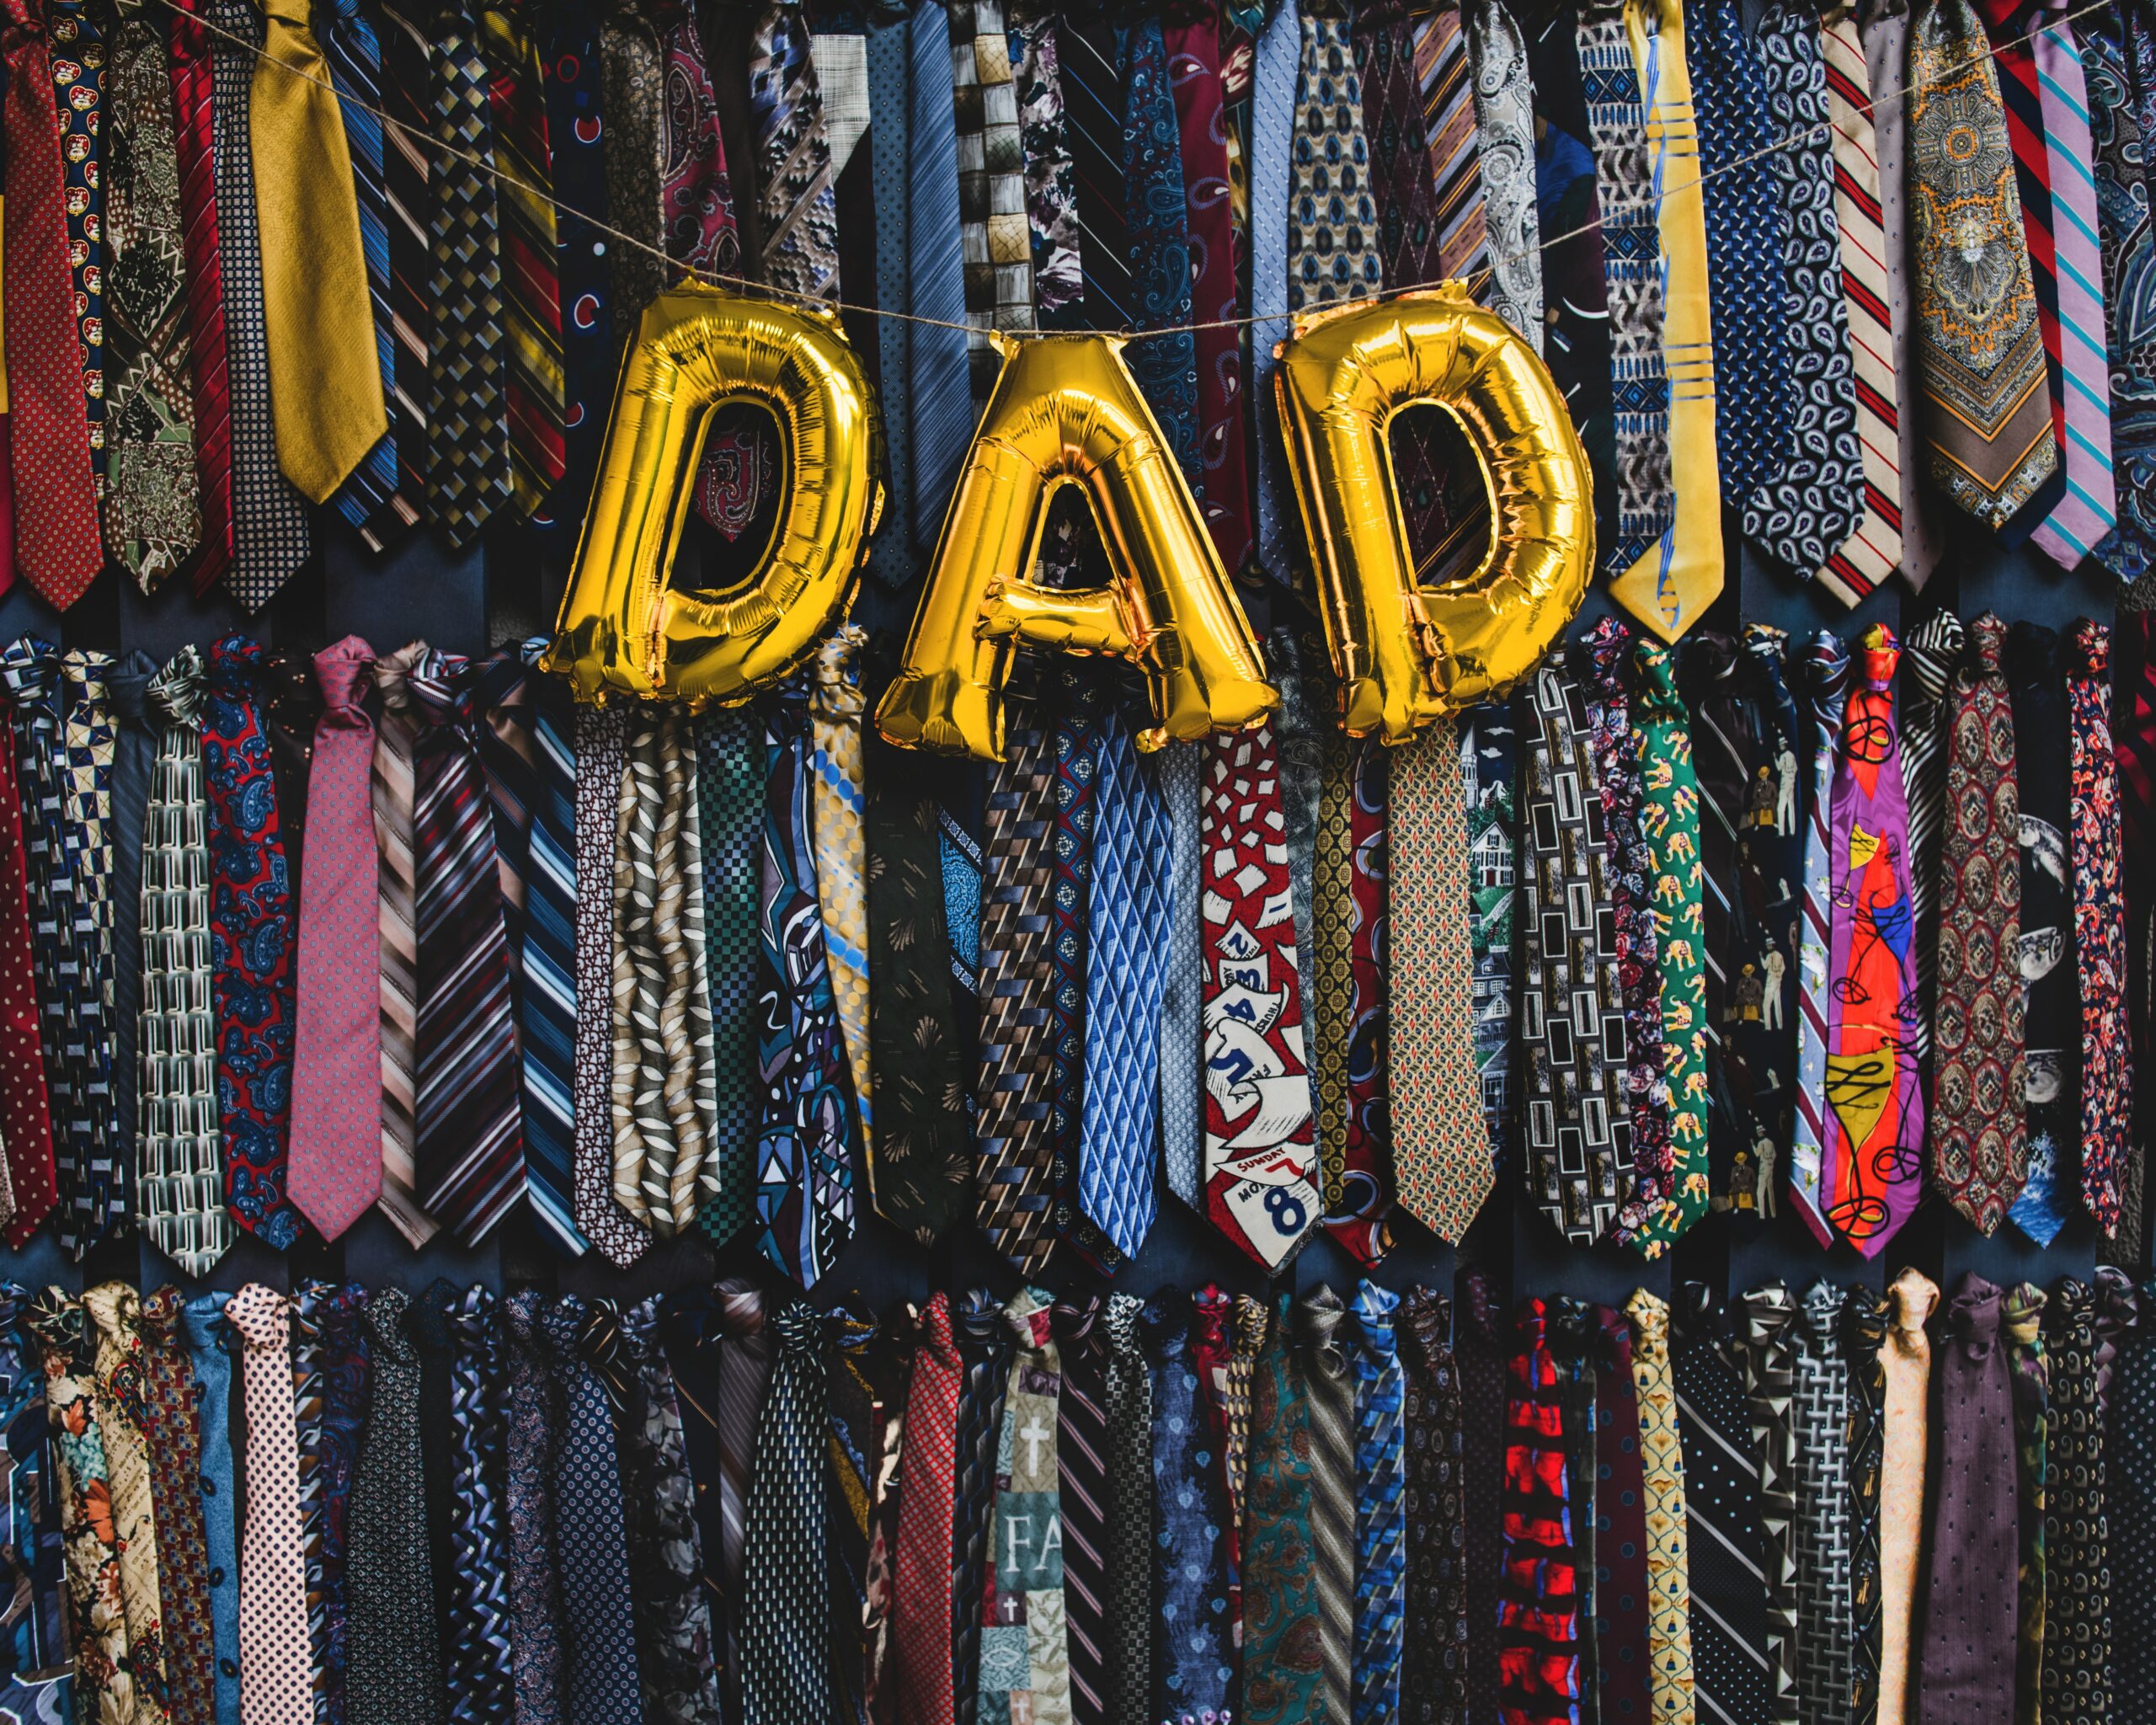 Gold balloons spelling “dad” in front of a wall of ties.